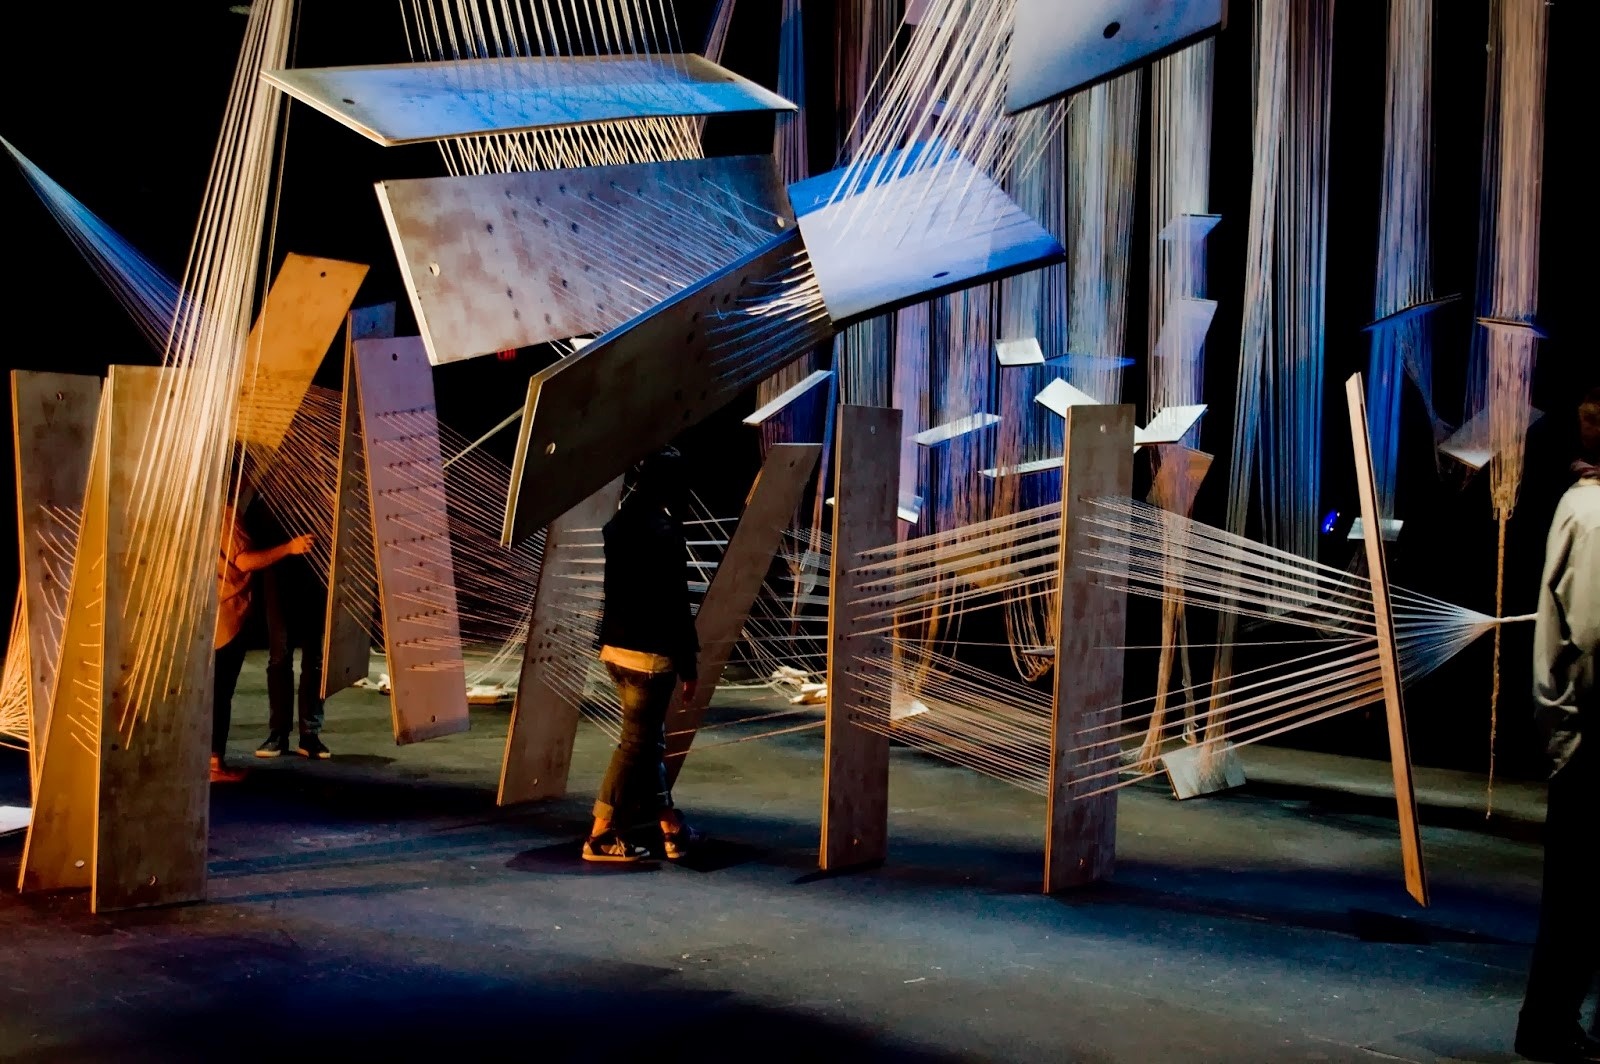 Immersive tactile installation of strings and light where au